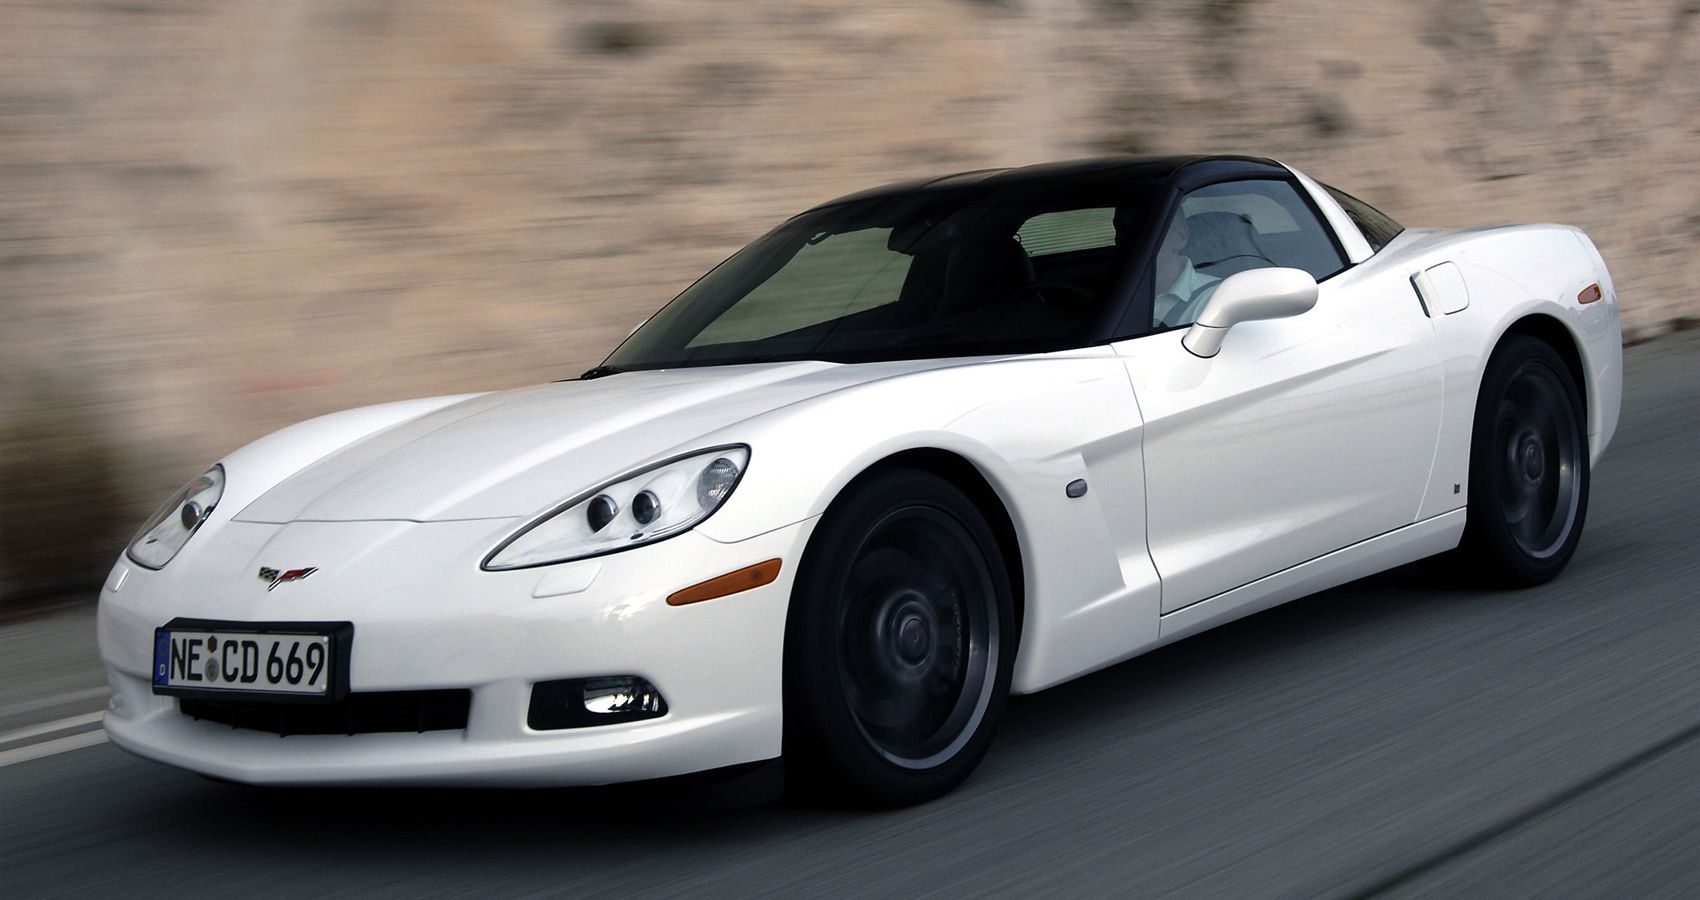 Front 3/4 view of a white C6 Corvette on the move